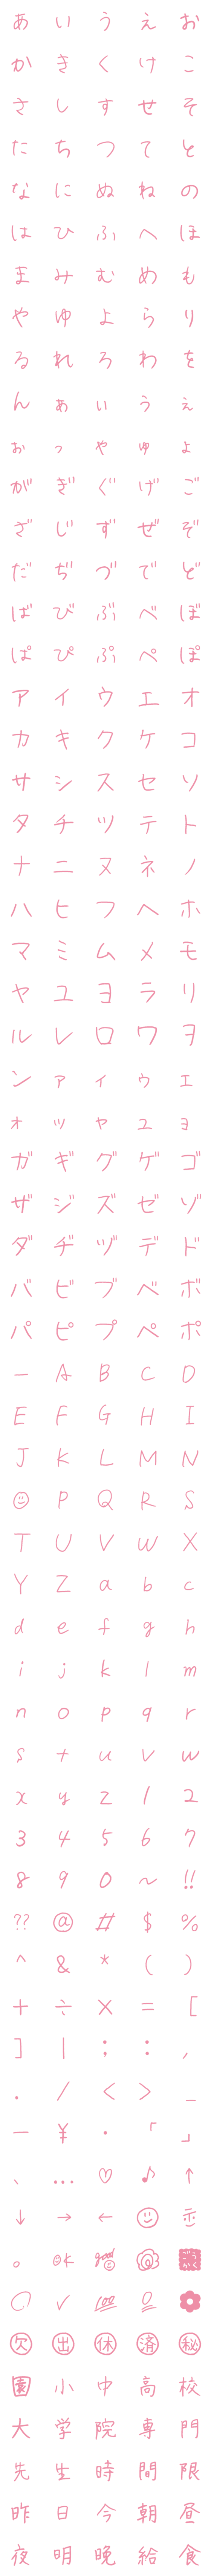 [LINE絵文字]先生っぽい字とマーク◎の画像一覧